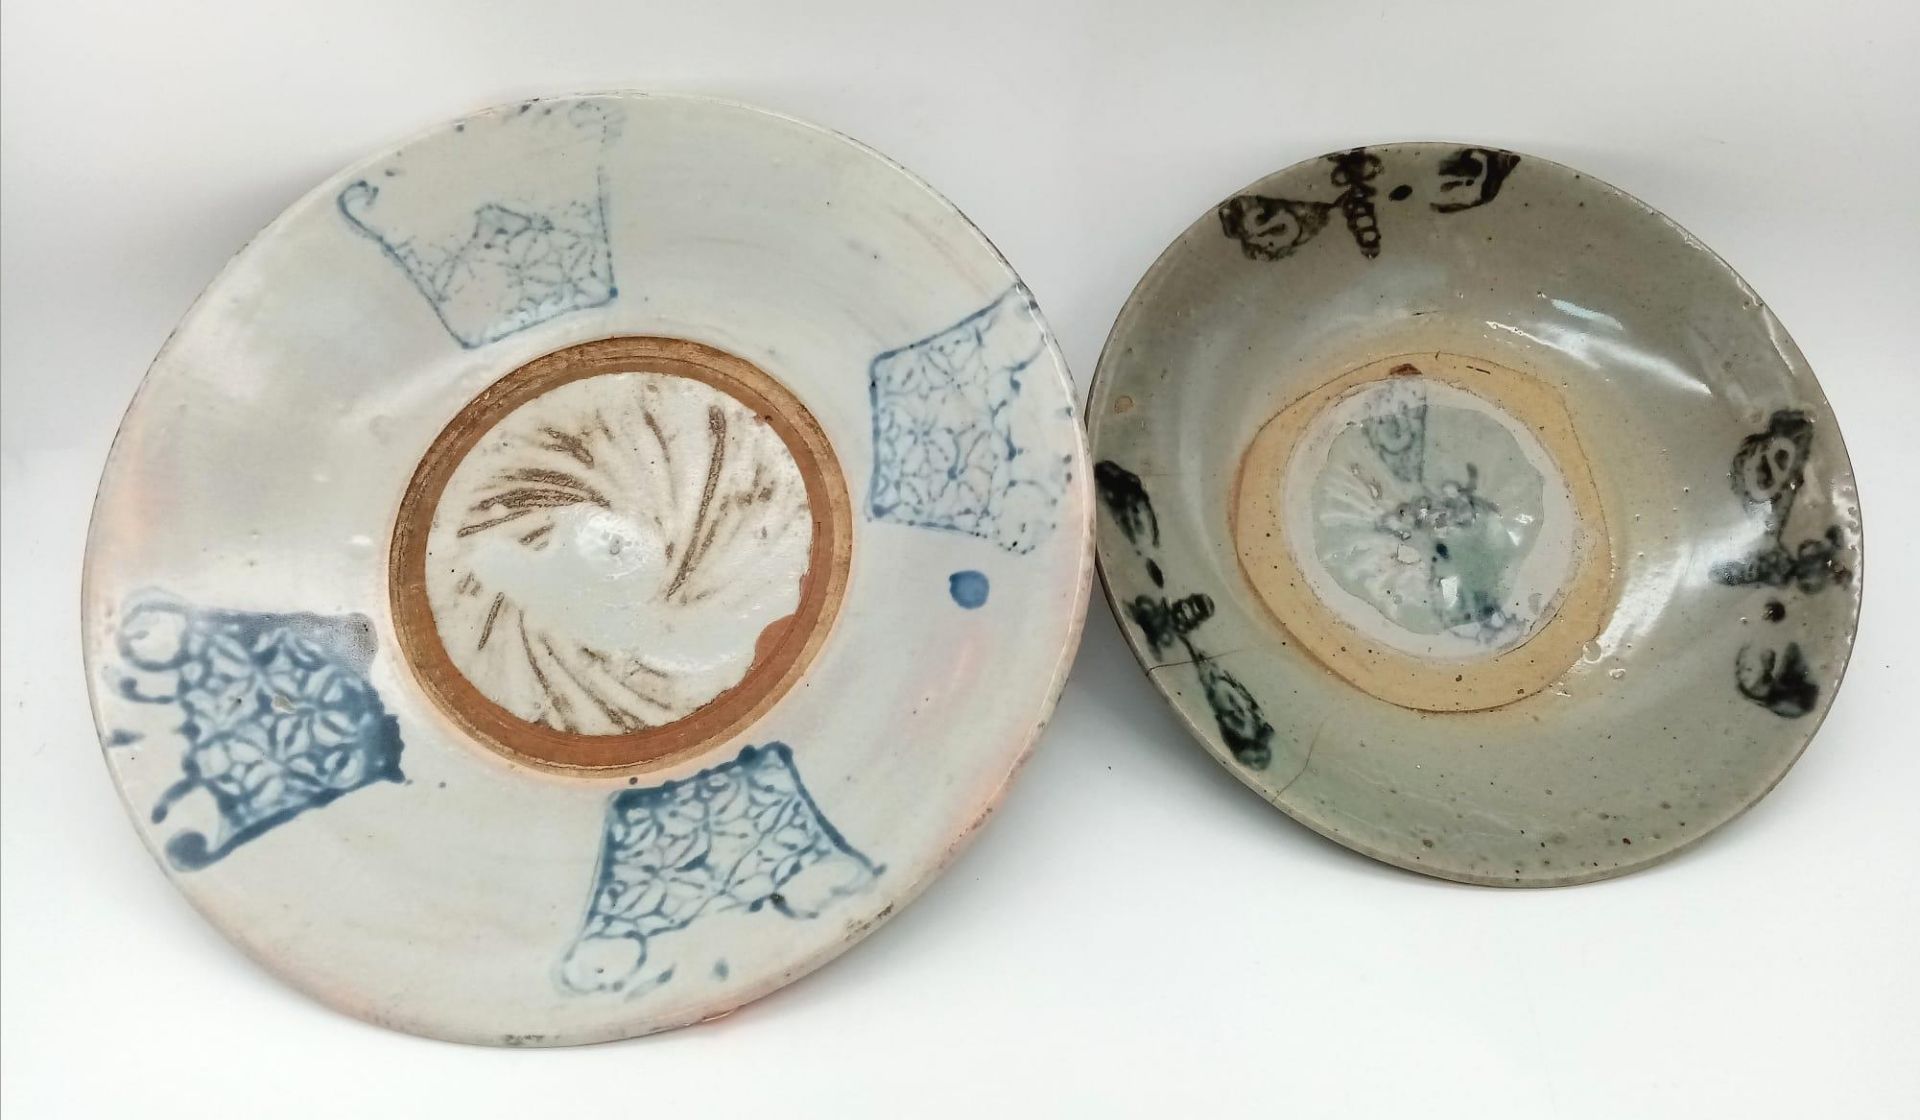 Two 15th Century Chinese Ceramic Bowls. Hand-painted decoration. 19cm and 23cm. Please see photos